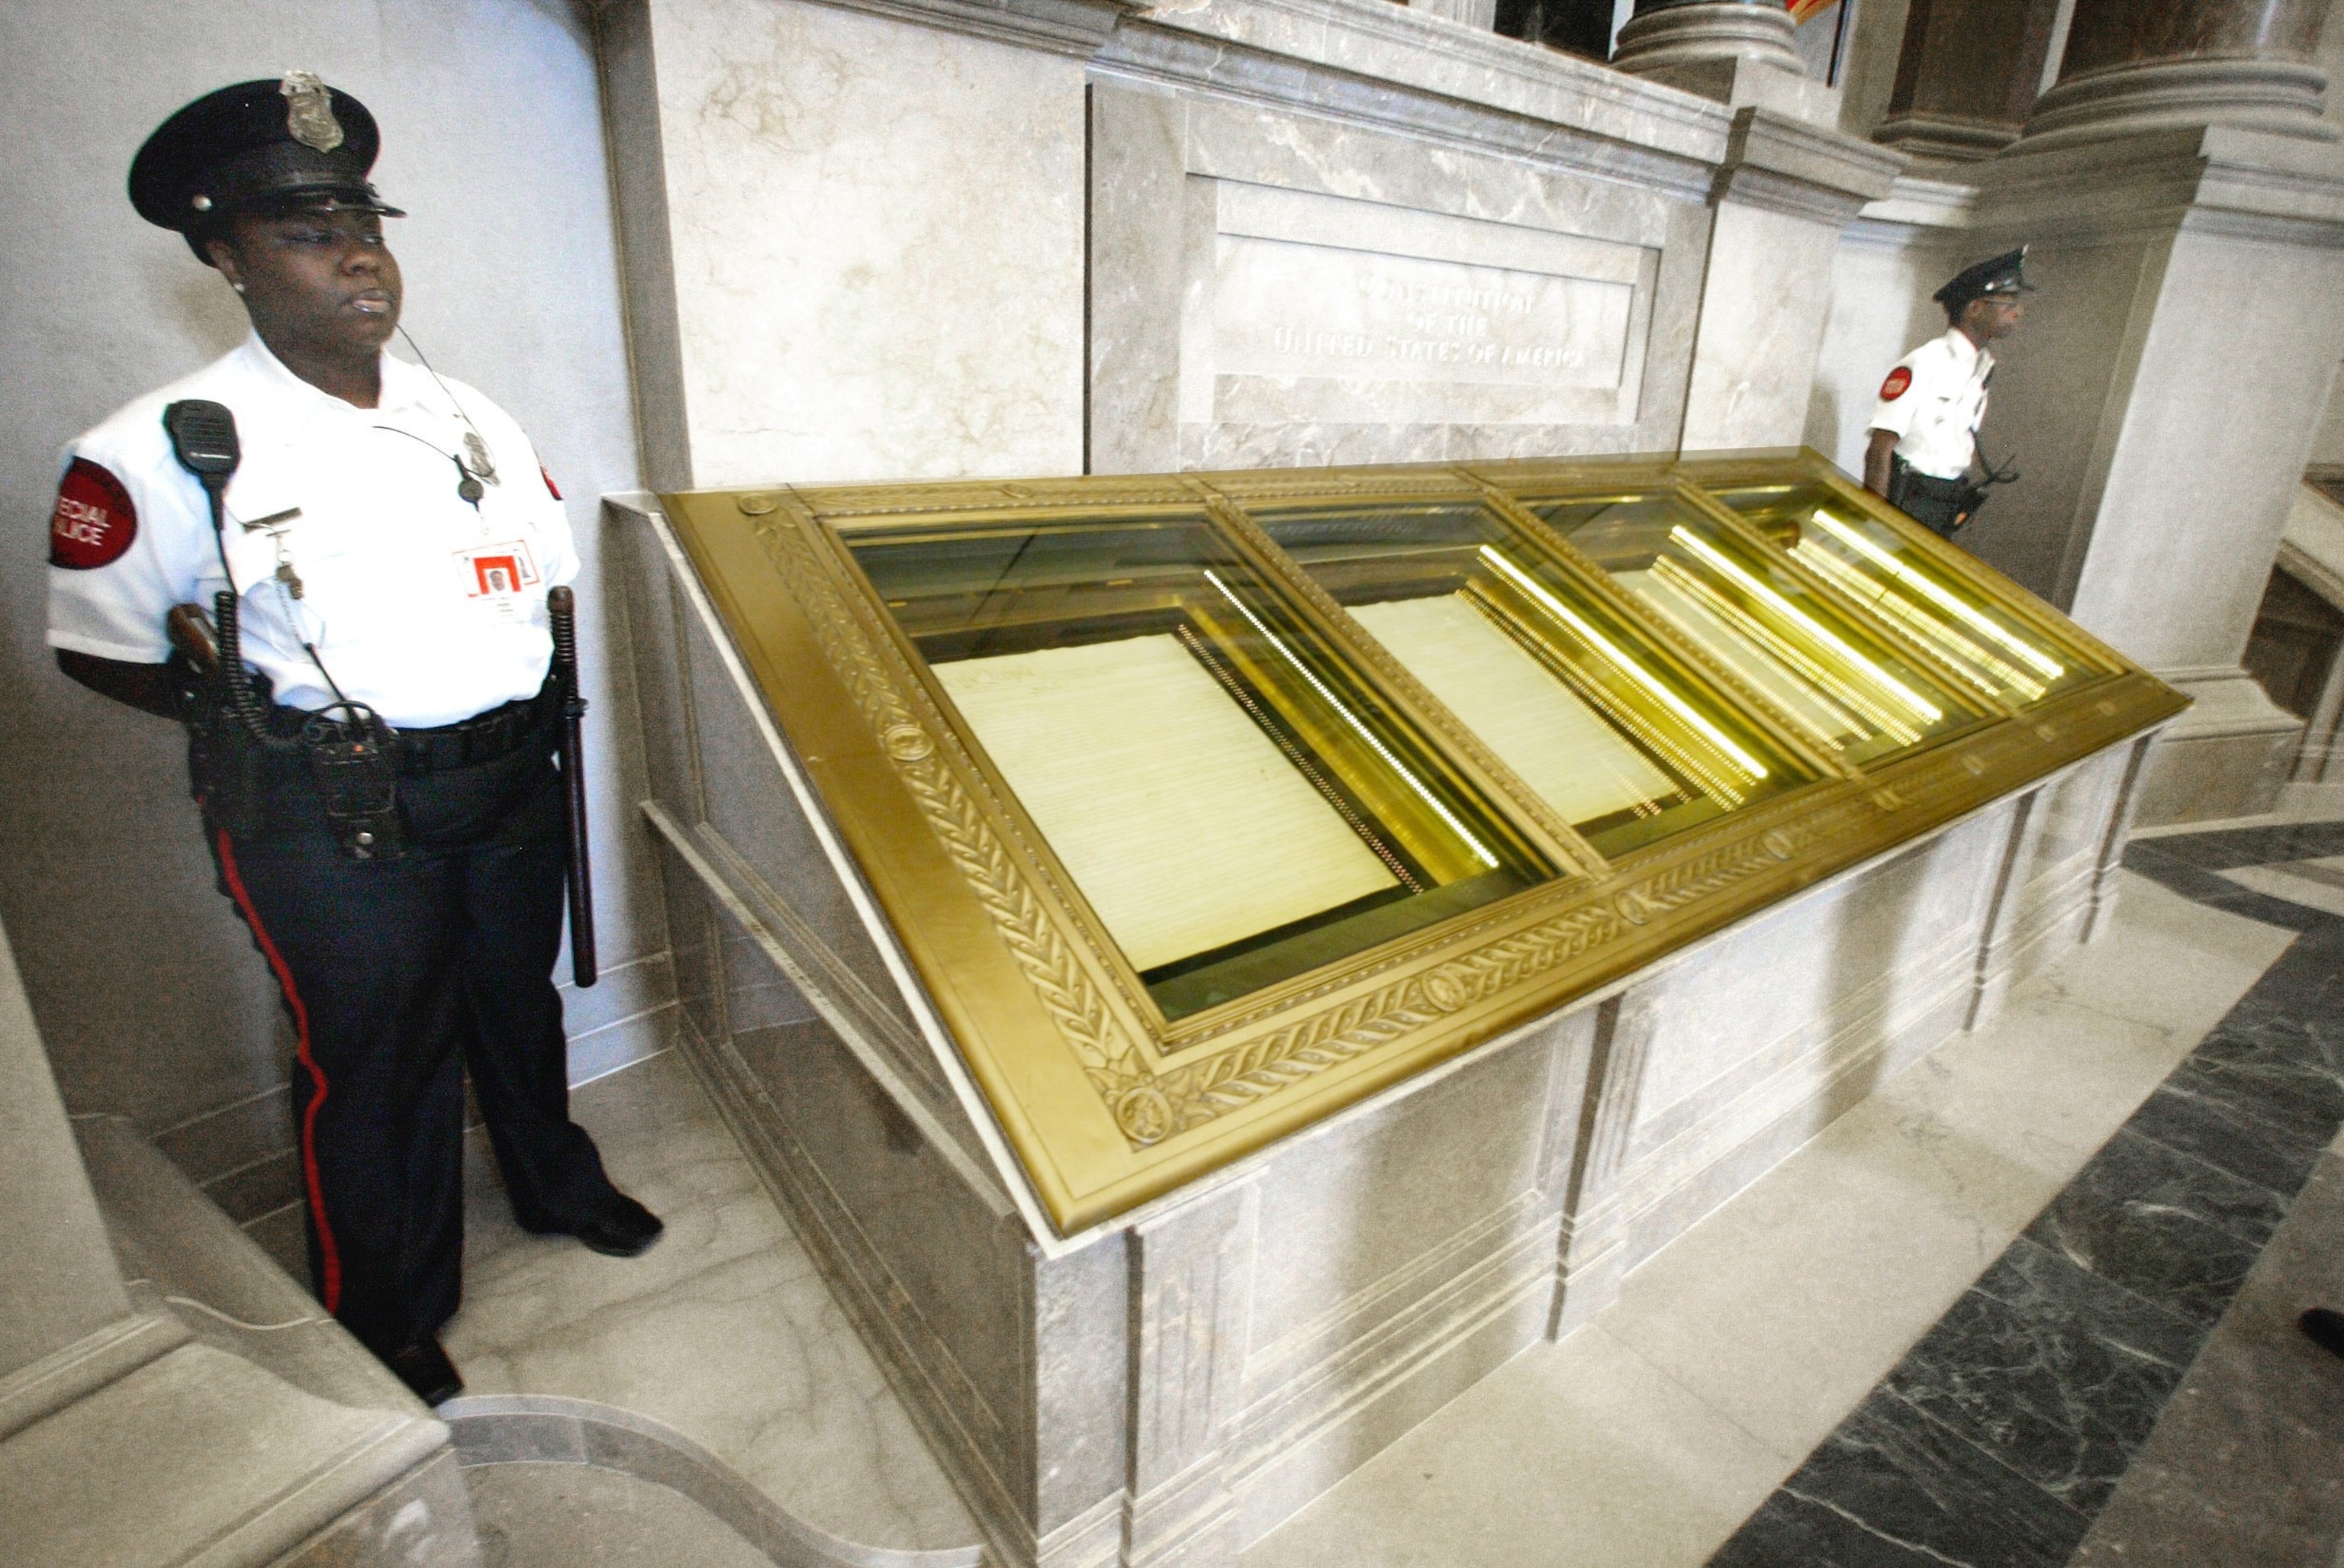 PHOTO: In this Sept. 16, 2003, file photo, guards stand next to the U.S. Constitution in the Rotunda of the National Archives in Washington, D.C.